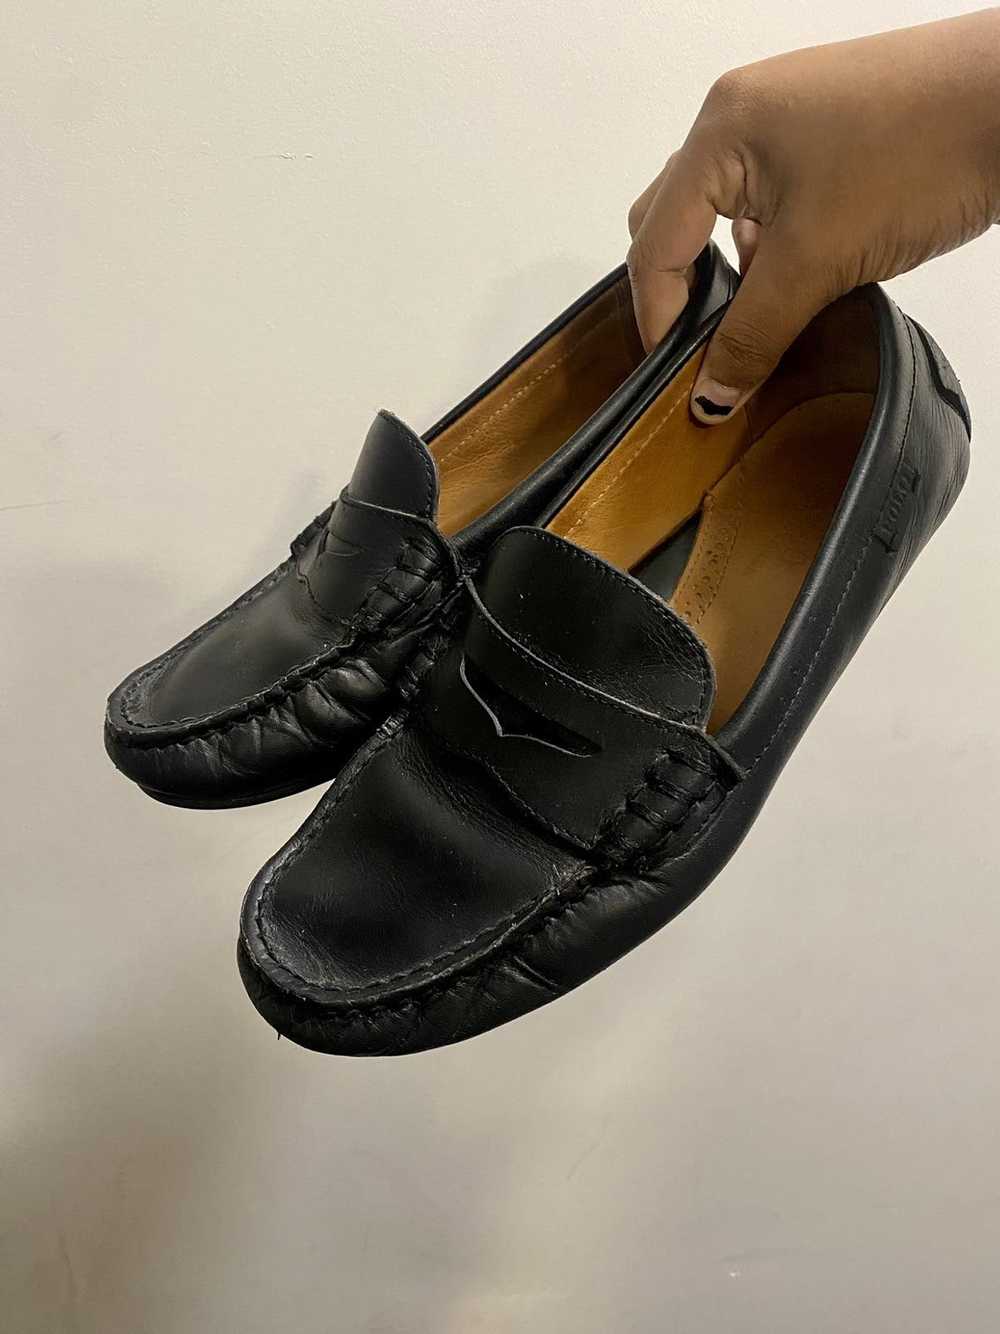 Polo Ralph Lauren Black Leather Loafers - Gem